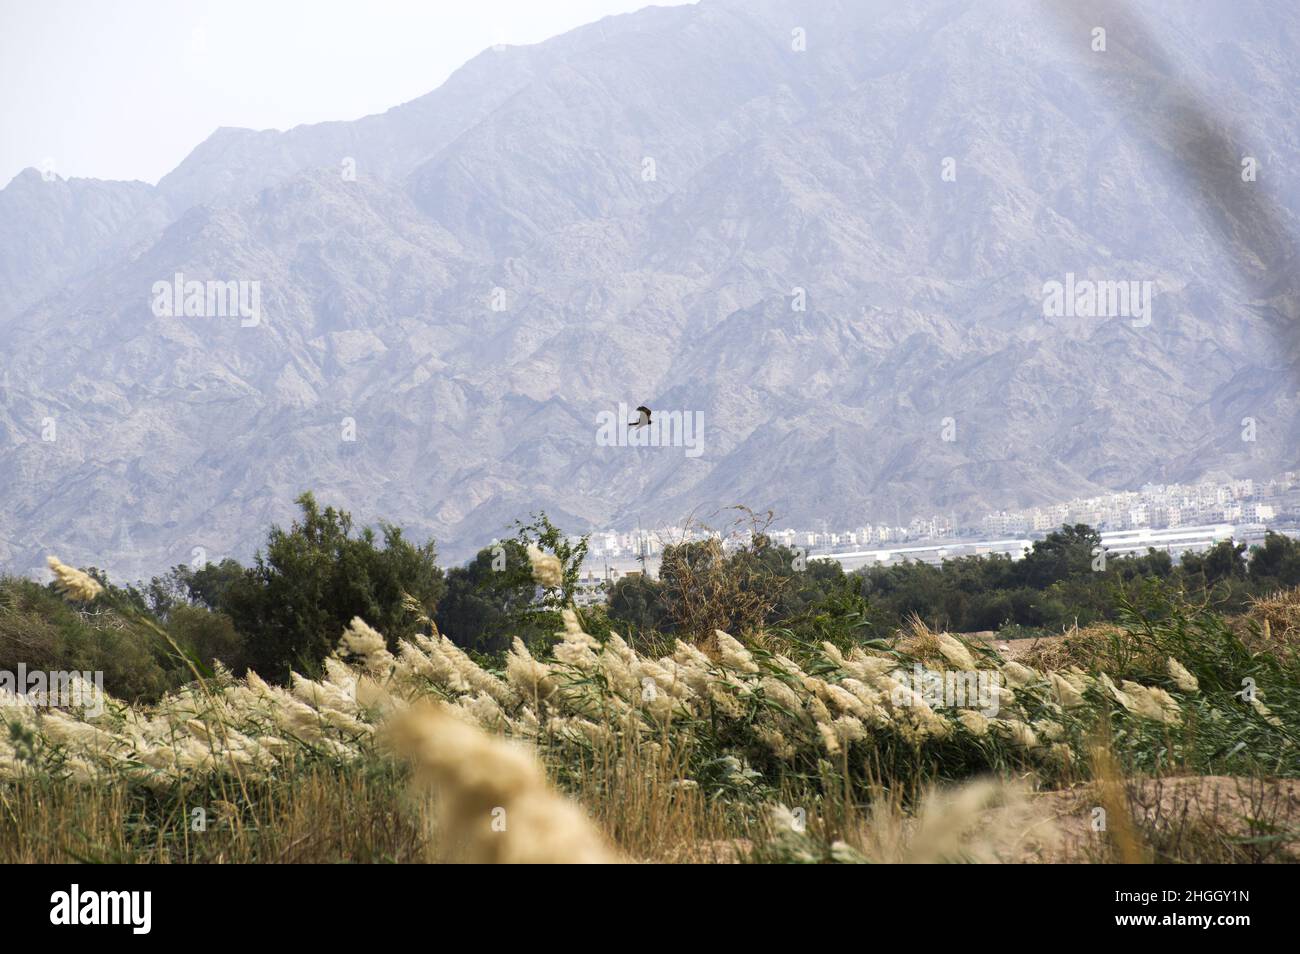 tall reeds and grass blowing in the wind at the Aqaba bird sanctuary and waste water treatment plant near the Israeli border with Jordan Stock Photo